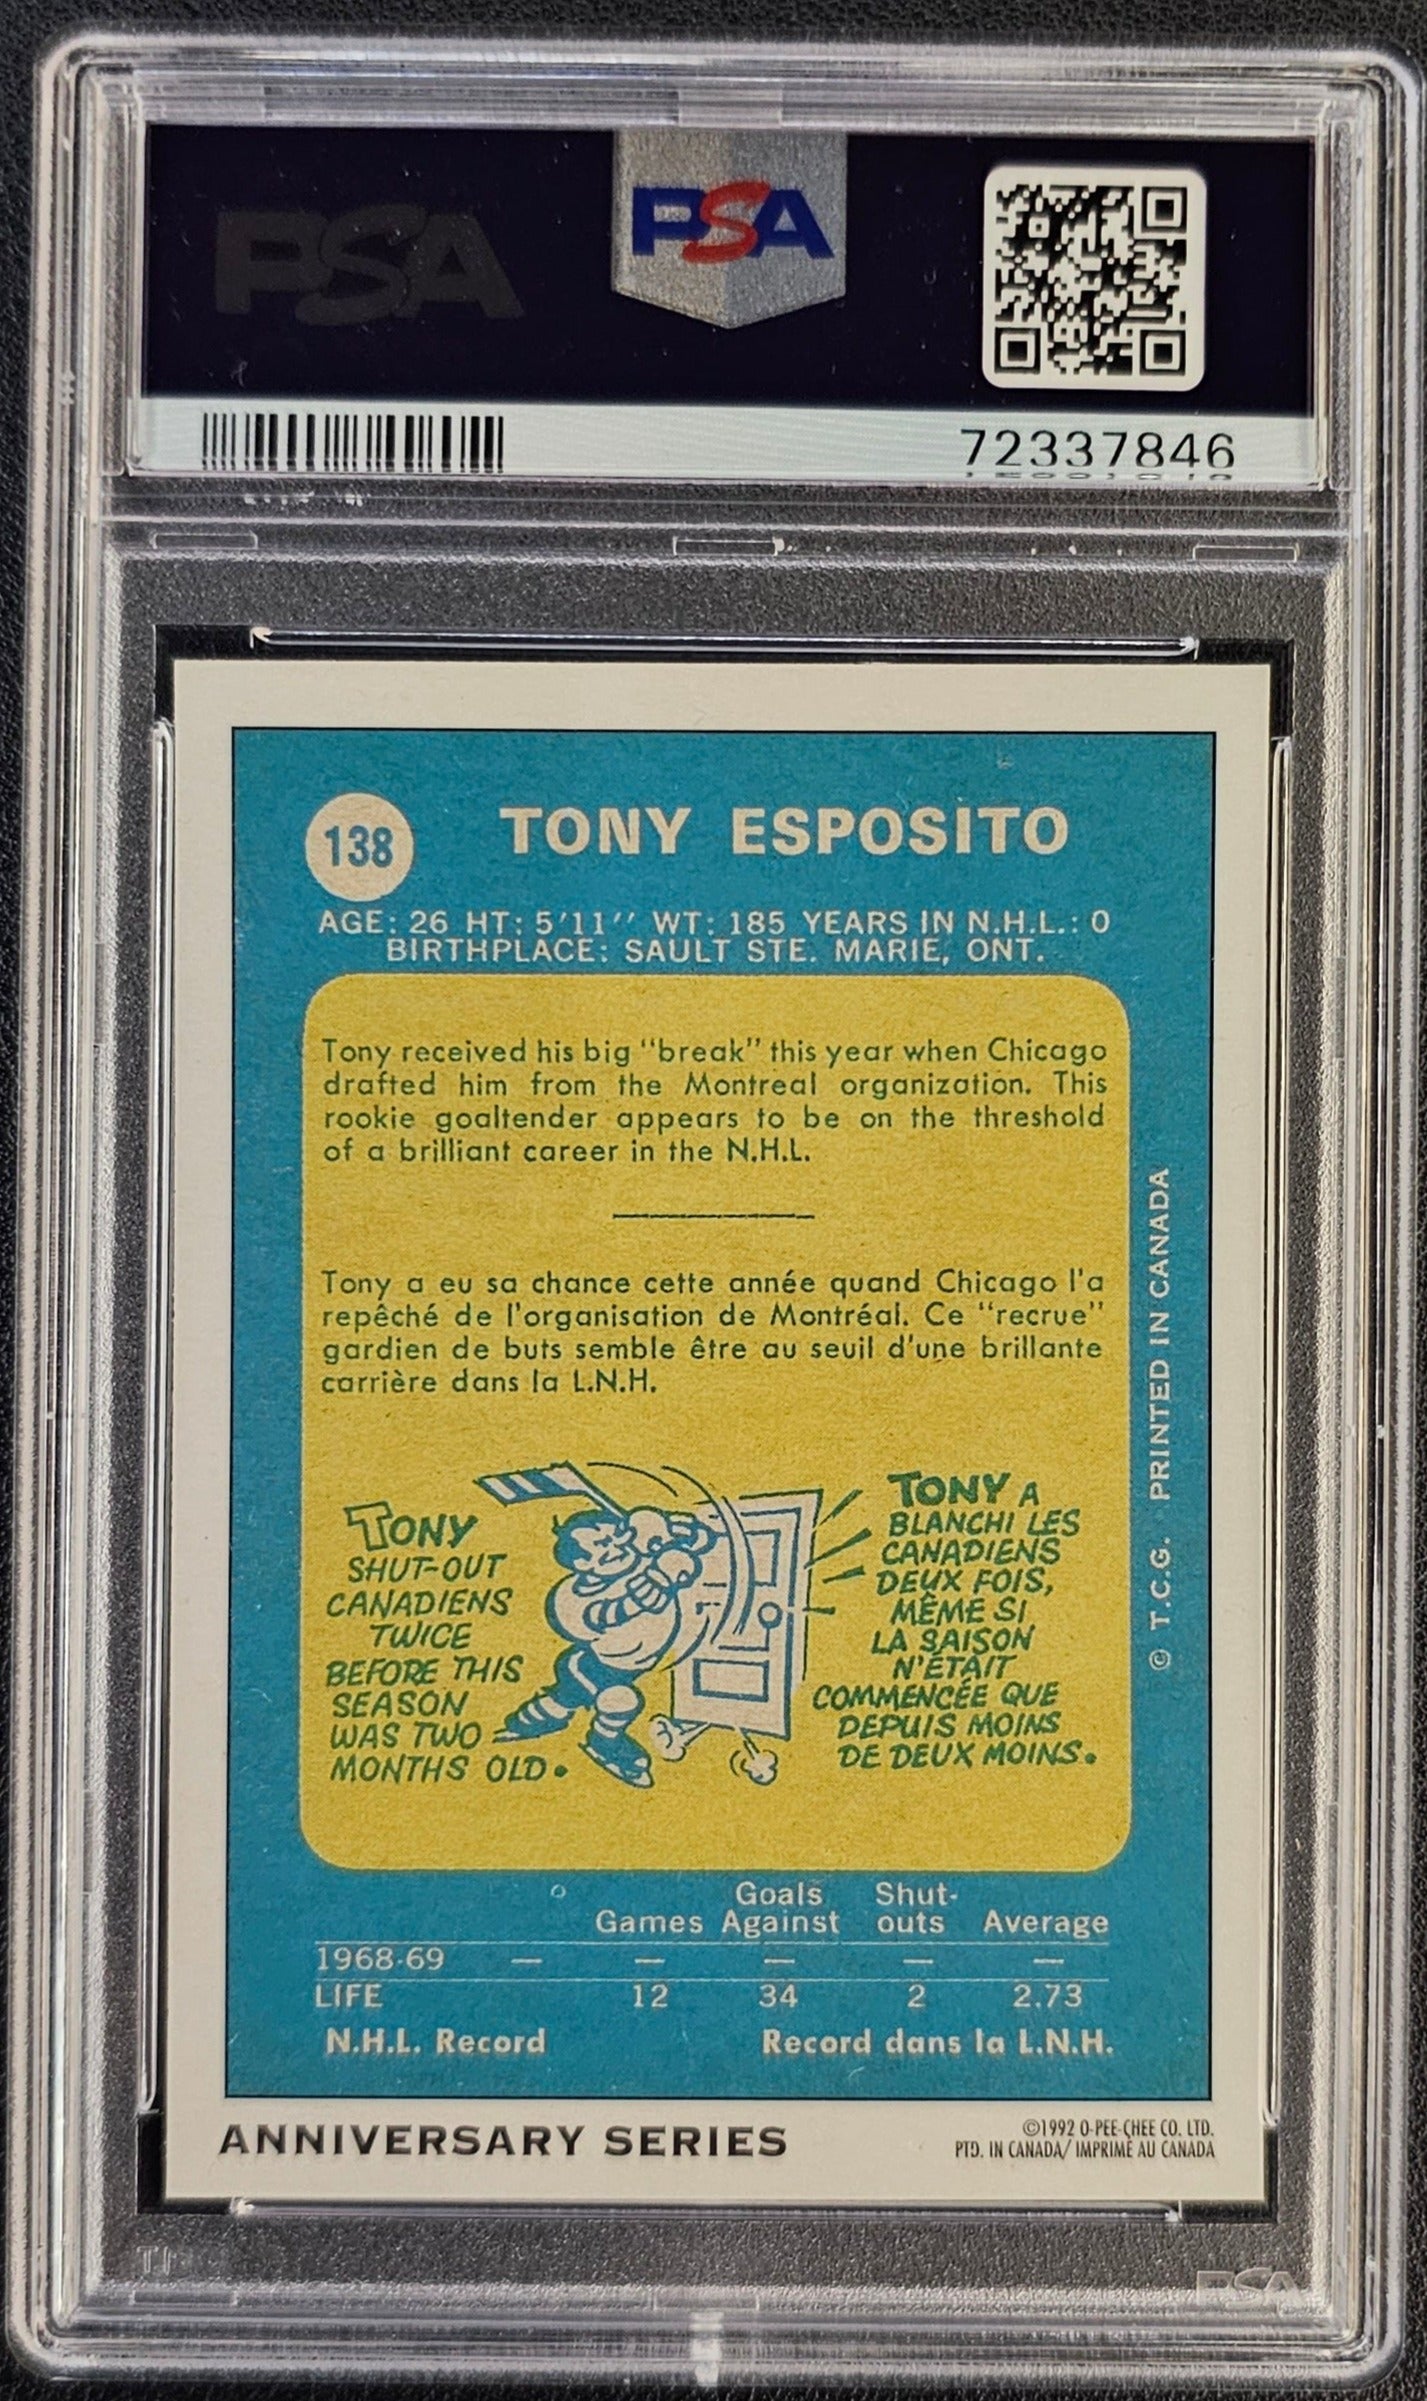 Tony Esposito - On  - Multiple Results on One Page